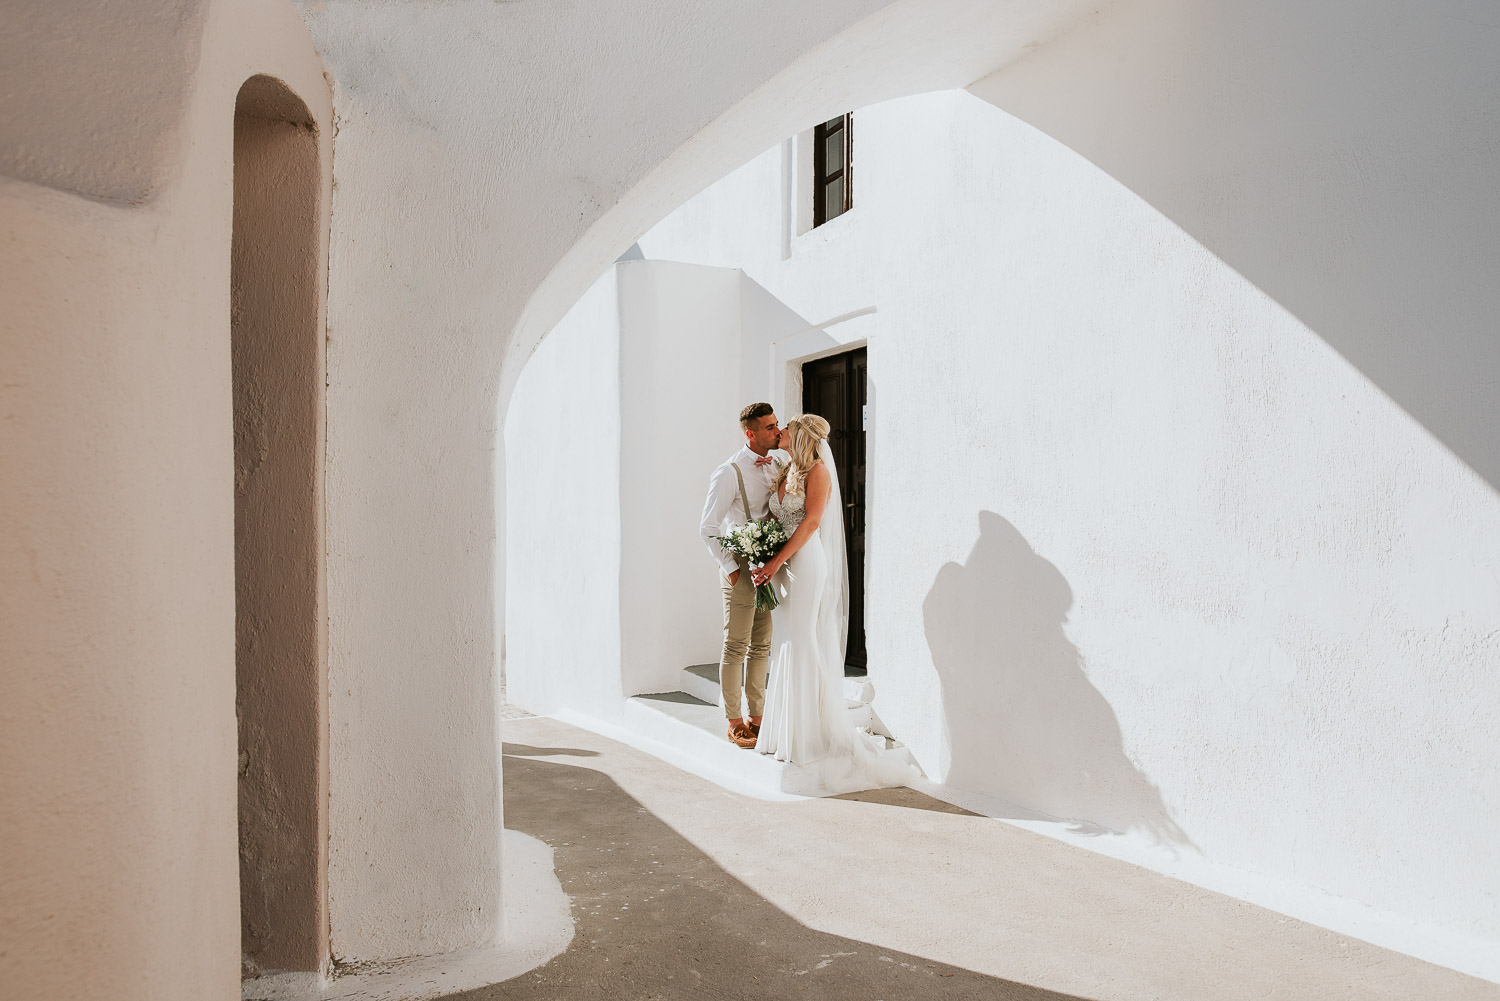 Wedding photographer Santorini: bride and groom kissing under the shapes and shades of Santorini by Ben and Vesna.